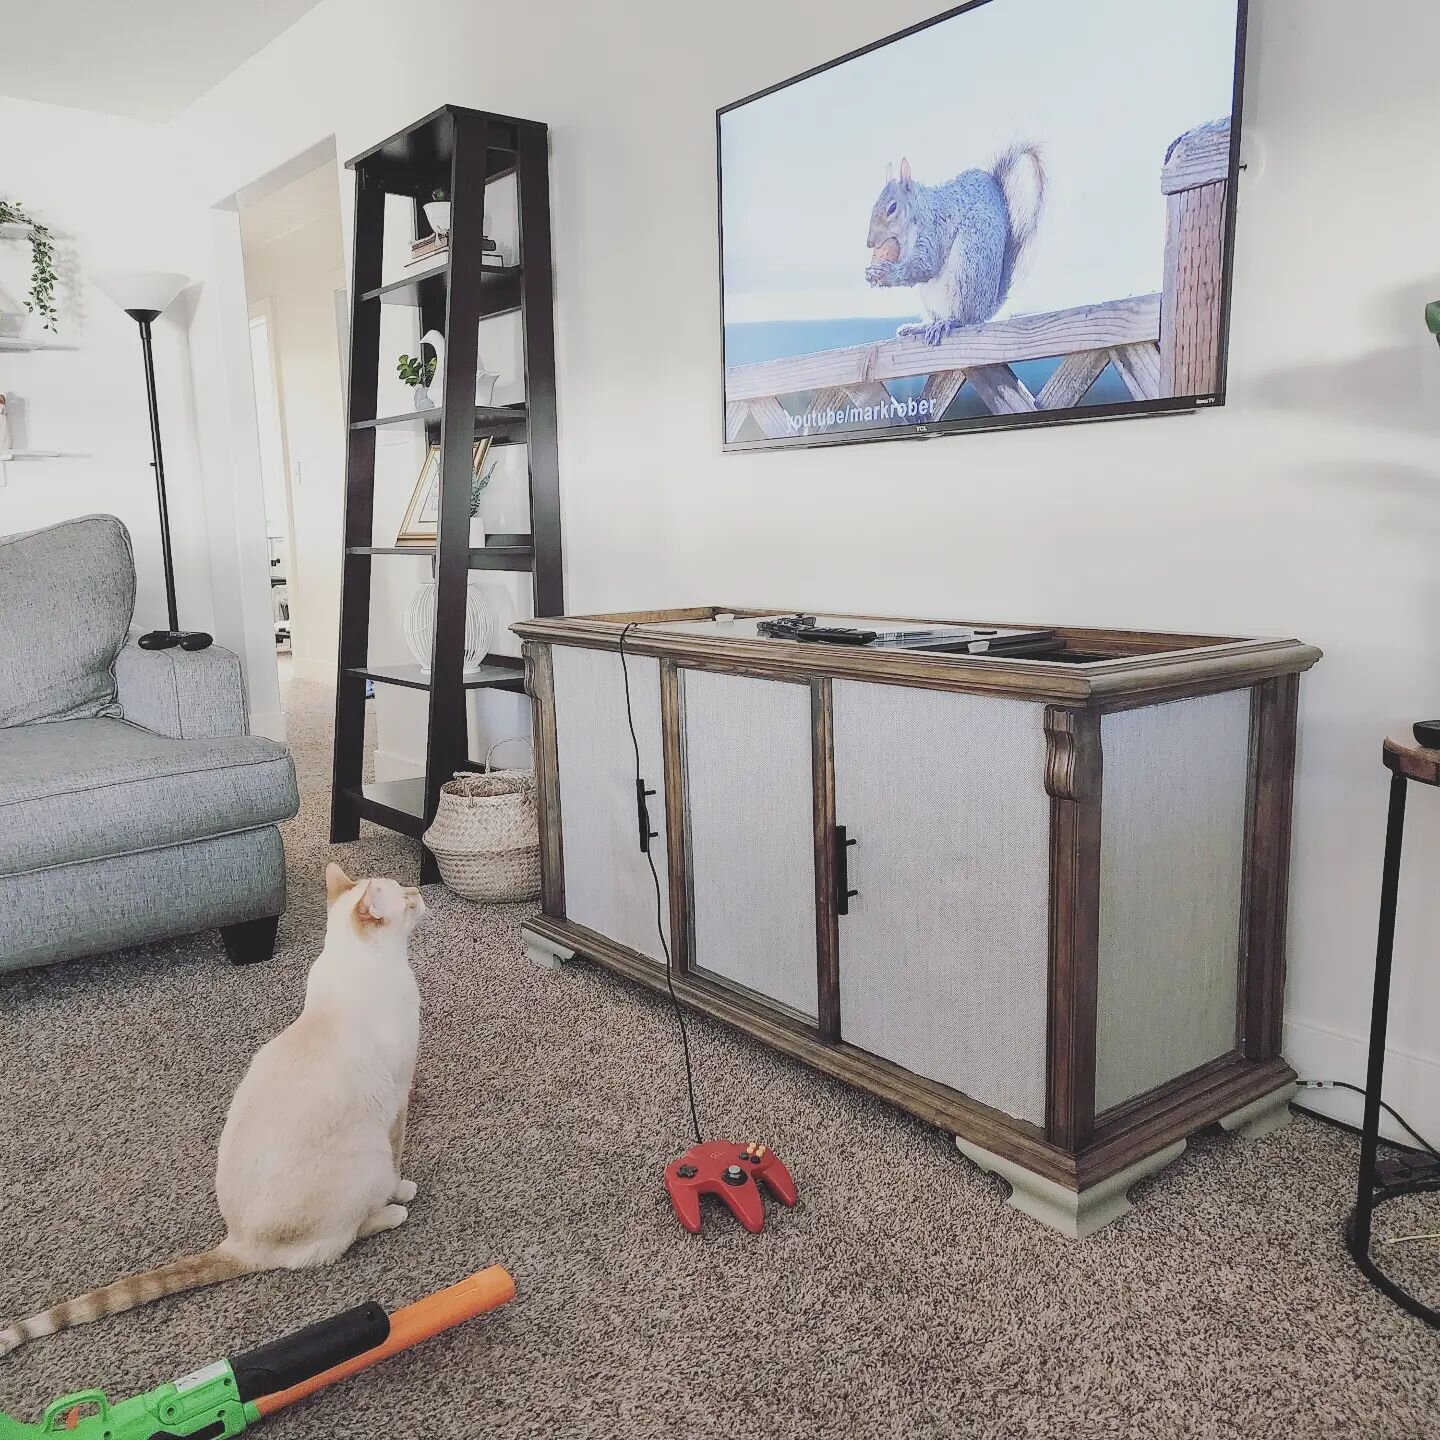 We had Khari's undivided attention watching #markrober with the squirrels and #fortknuts